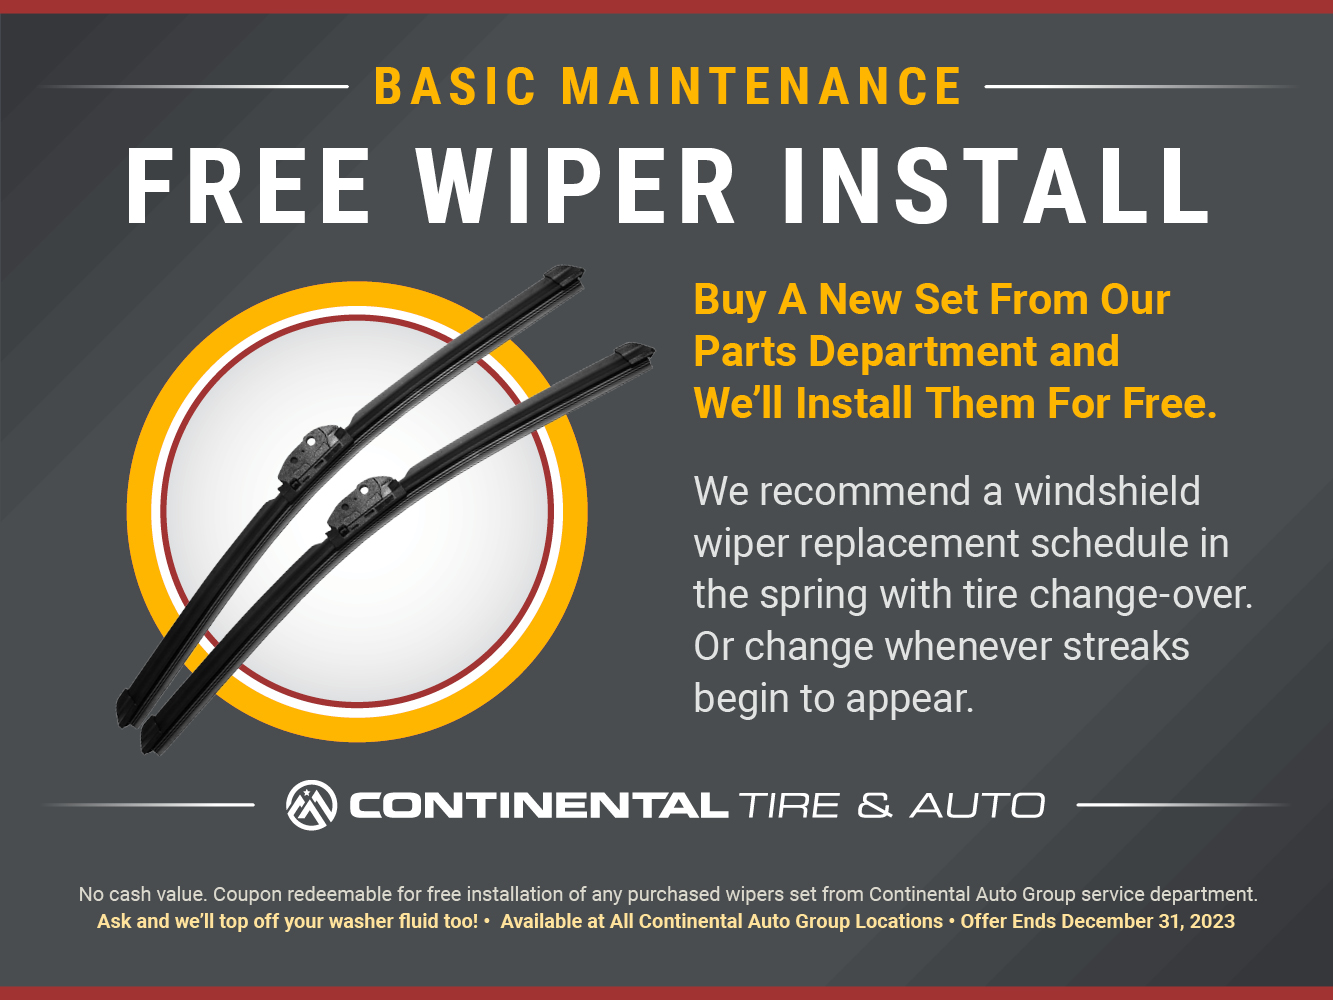 Buy Wipers and We’ll Install Them For Free